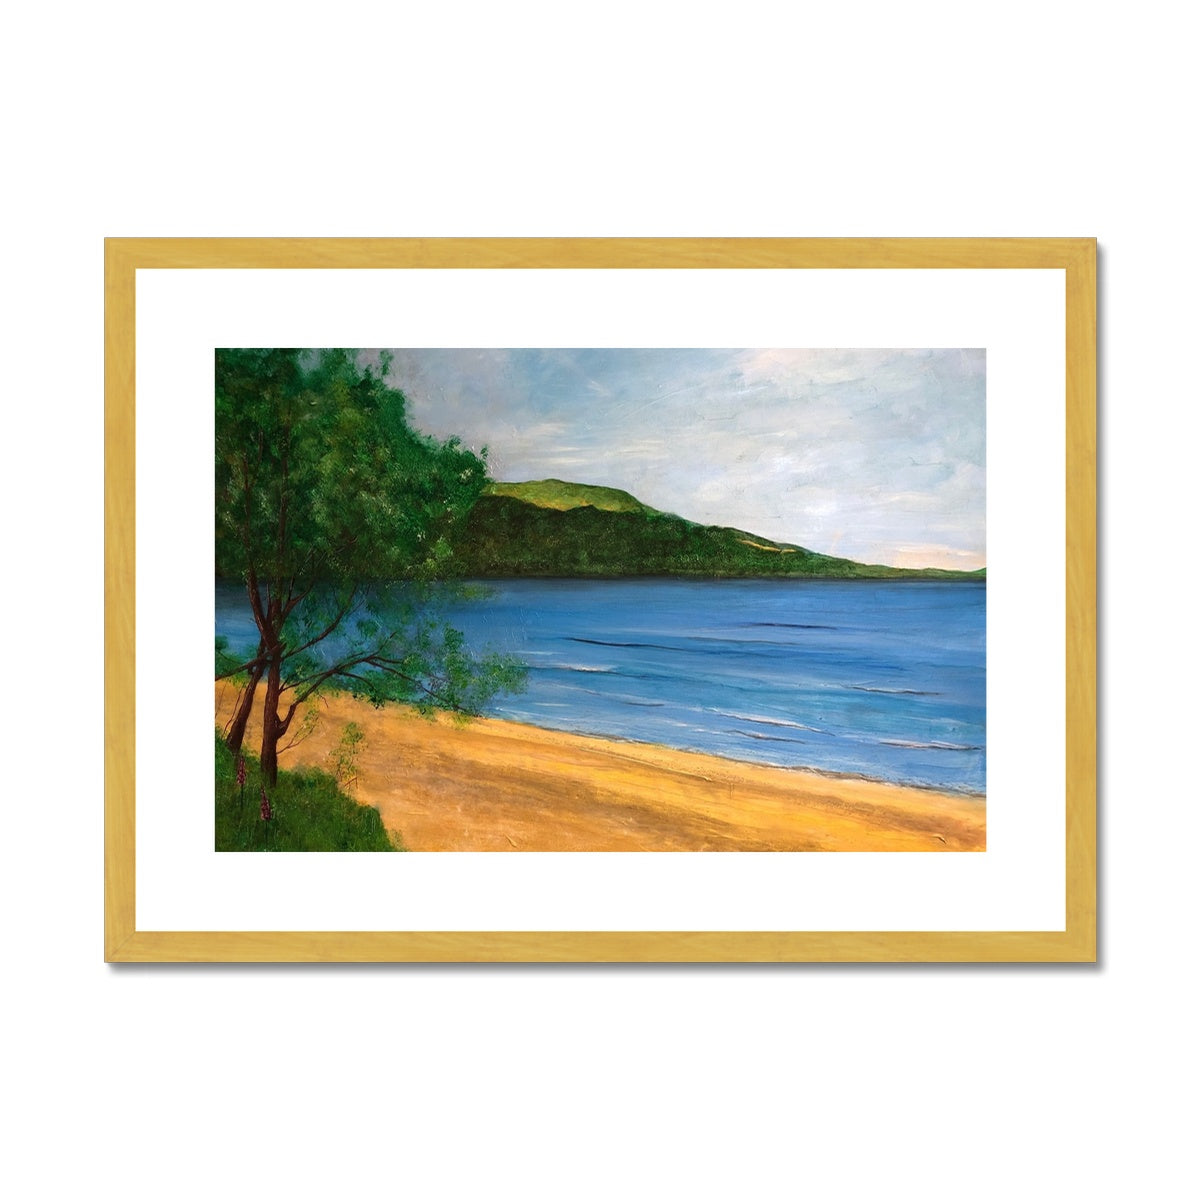 Loch Rannoch Painting | Antique Framed & Mounted Prints From Scotland-Fine art-Scottish Lochs & Mountains Art Gallery-A2 Landscape-Gold Frame-Paintings, Prints, Homeware, Art Gifts From Scotland By Scottish Artist Kevin Hunter